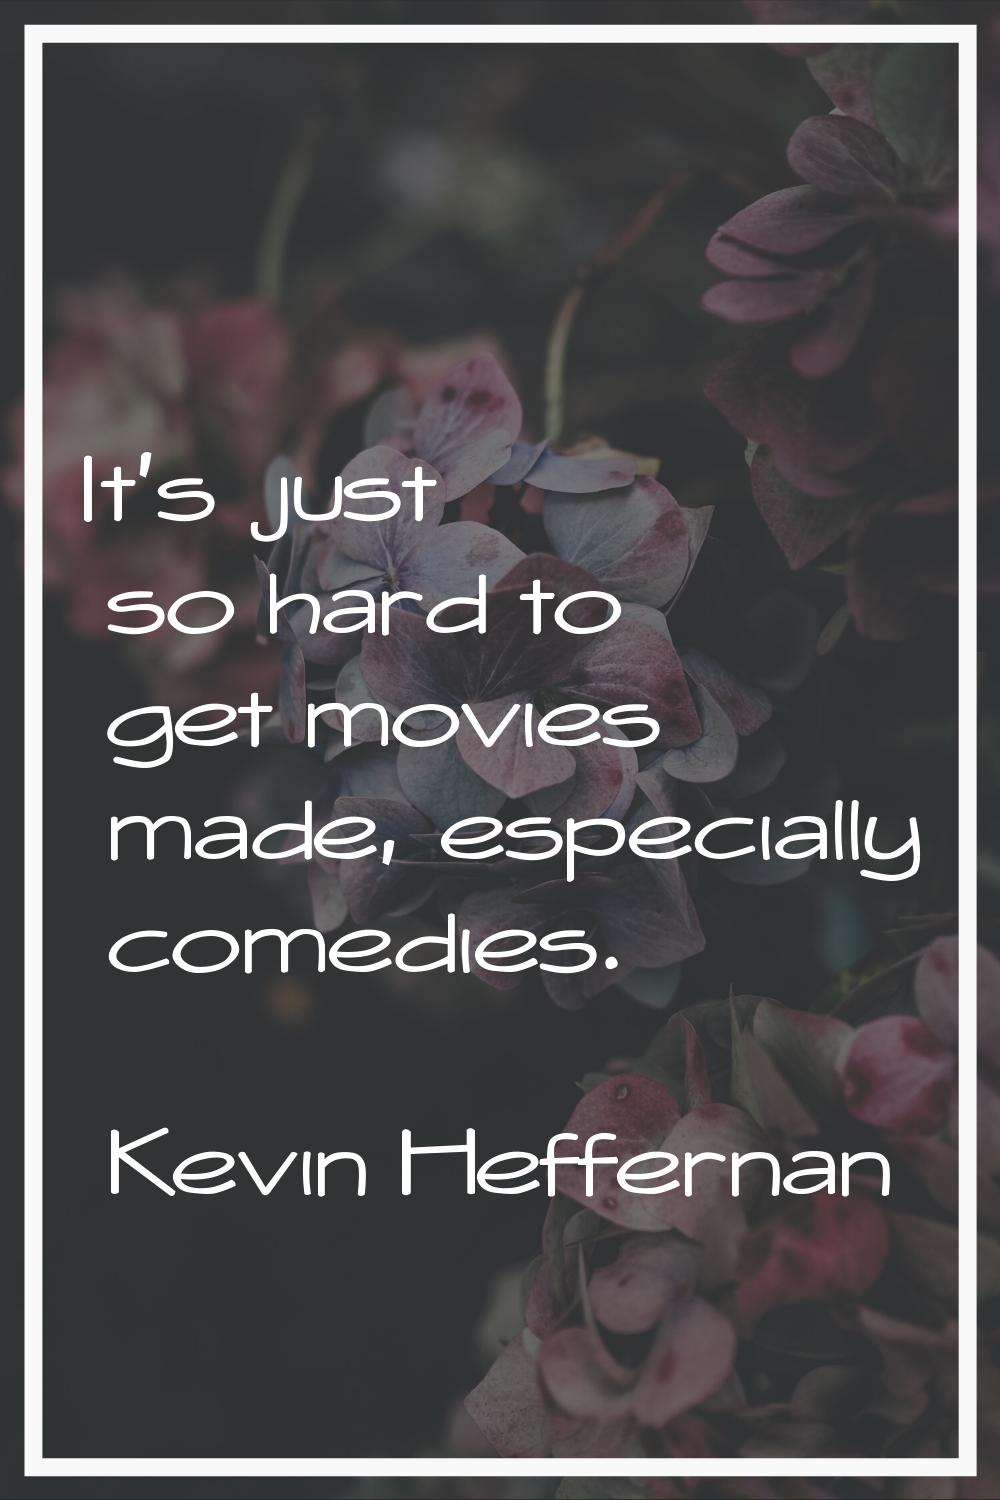 It's just so hard to get movies made, especially comedies.